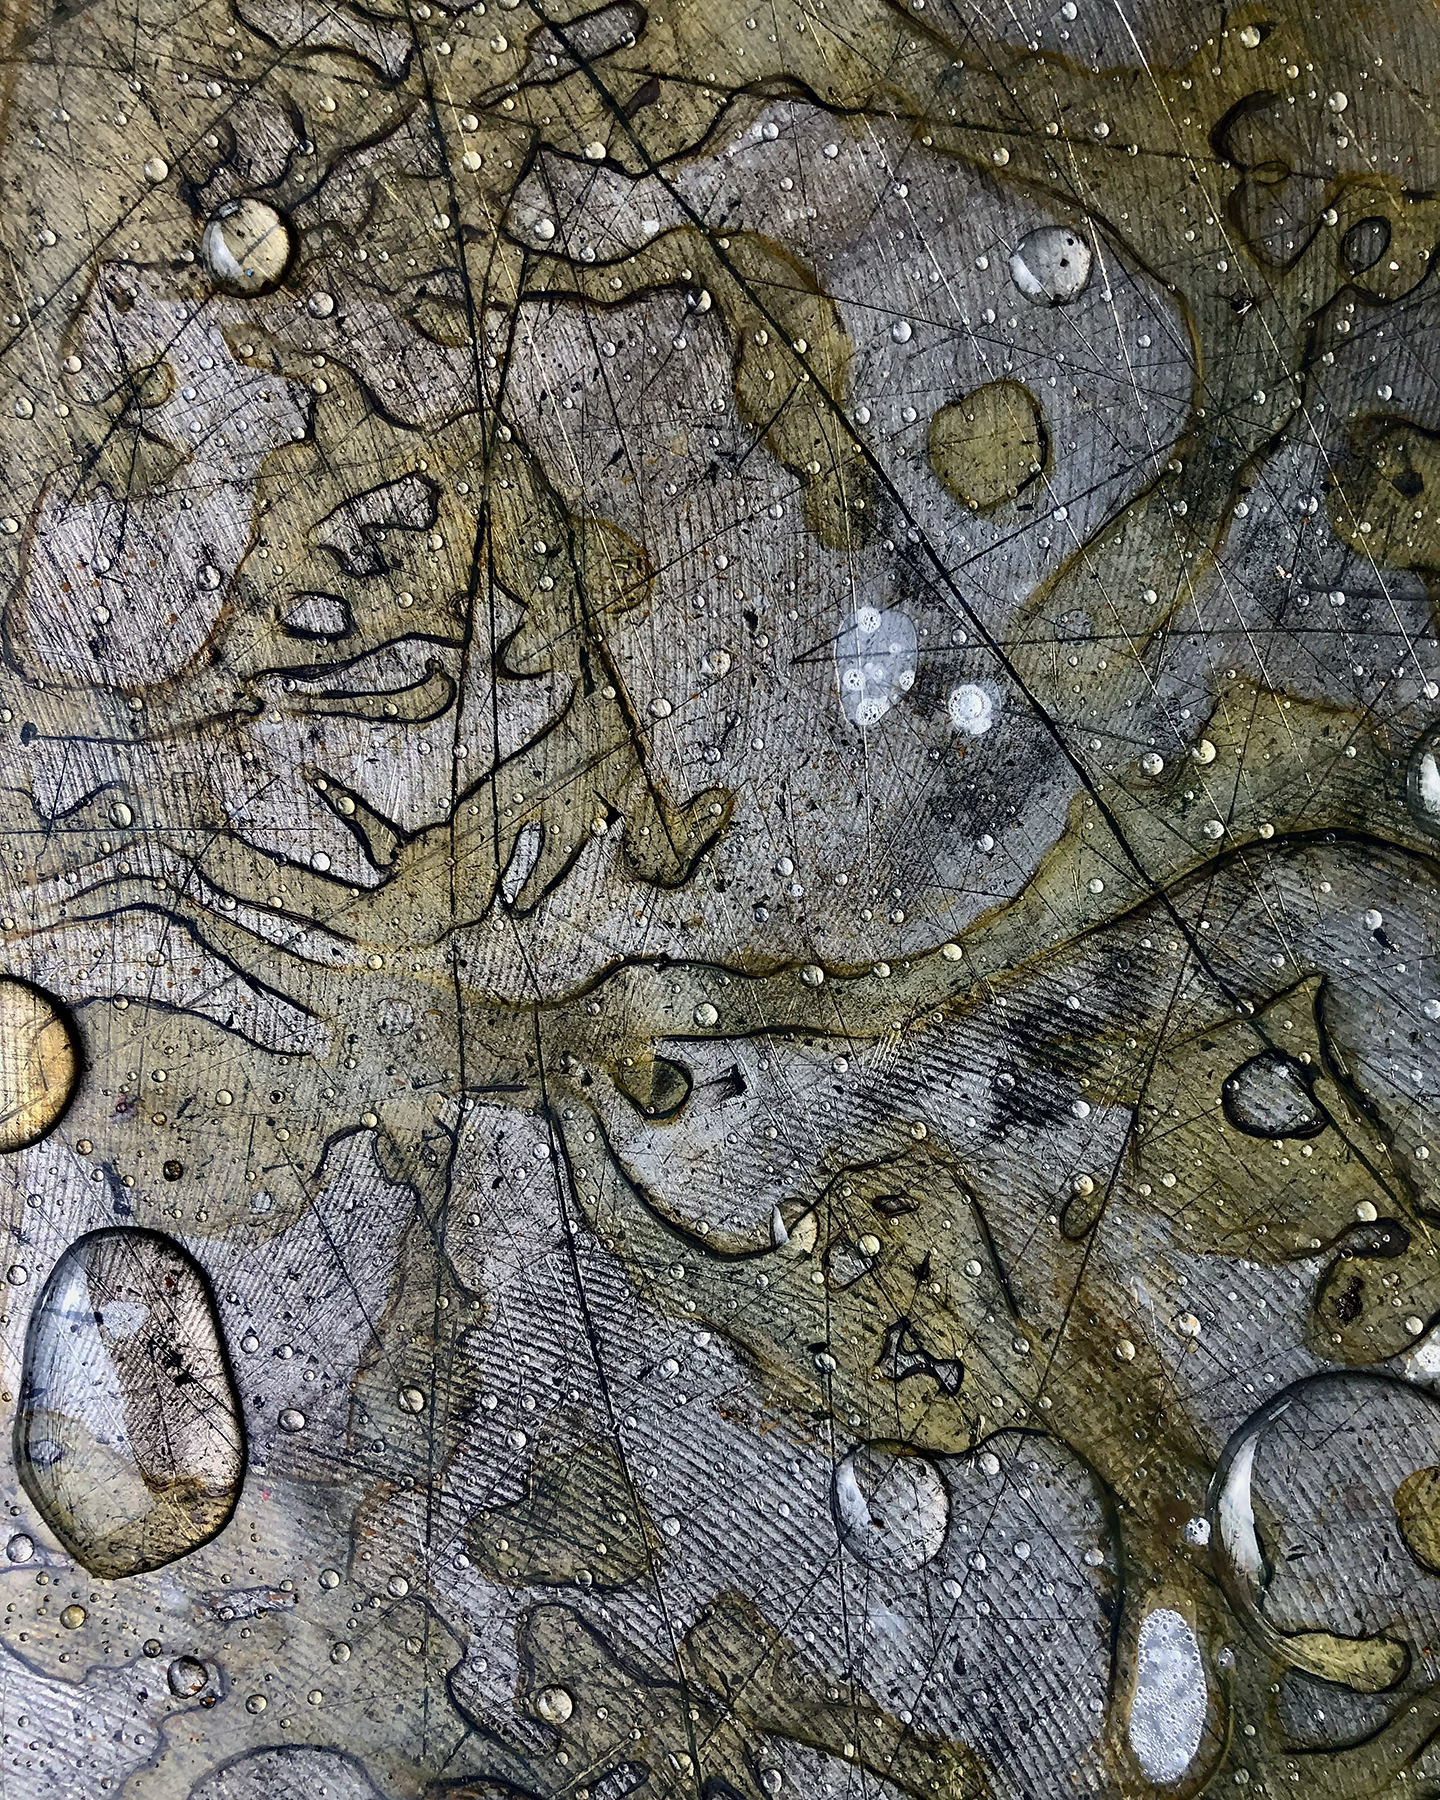 An abstract photo of rust patterns and water droplets on the machined metal surface of an industrial cutting machine stored in a parking lot.